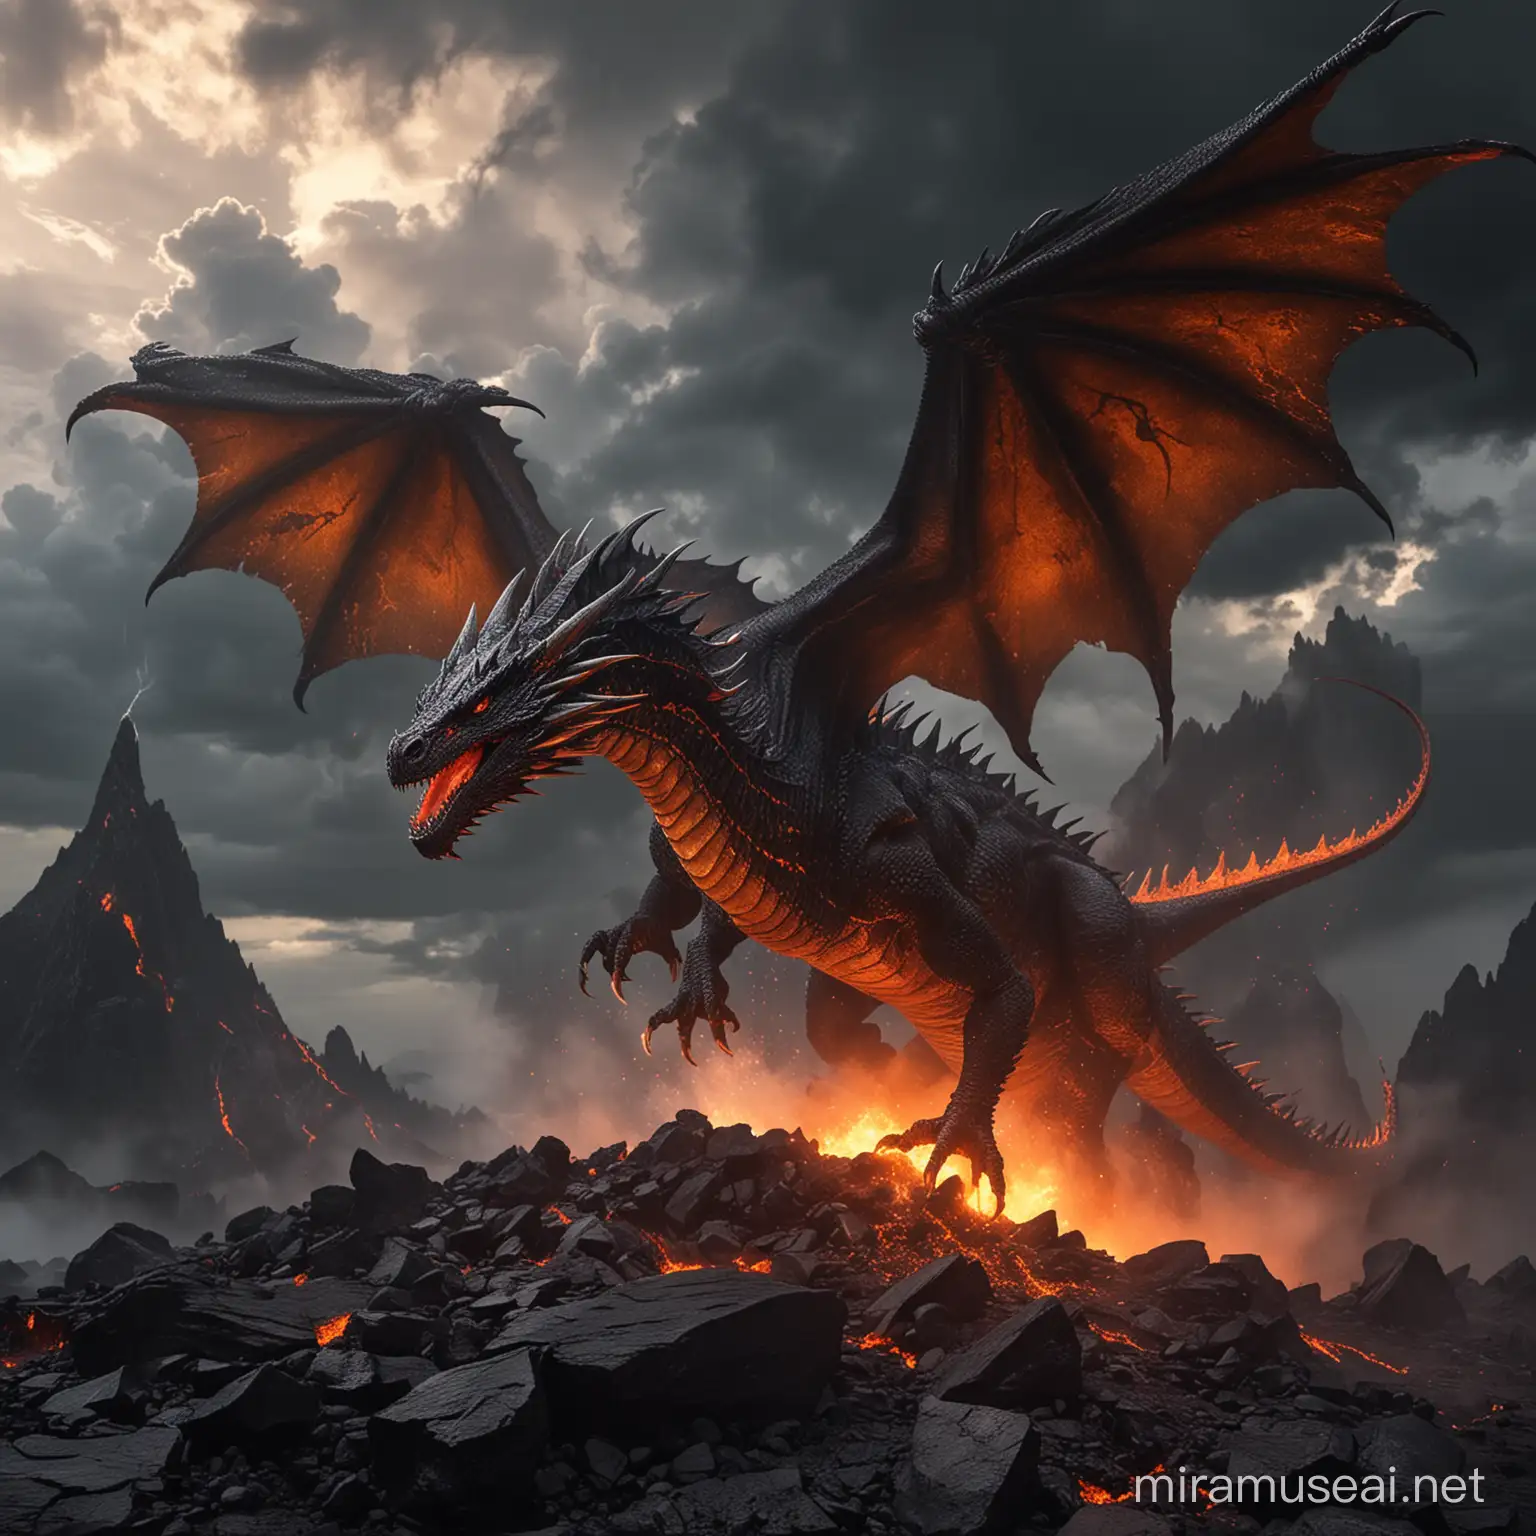 Majestic Volcanic Winged Dragon Glowing Black Scales and Dramatic Atmosphere